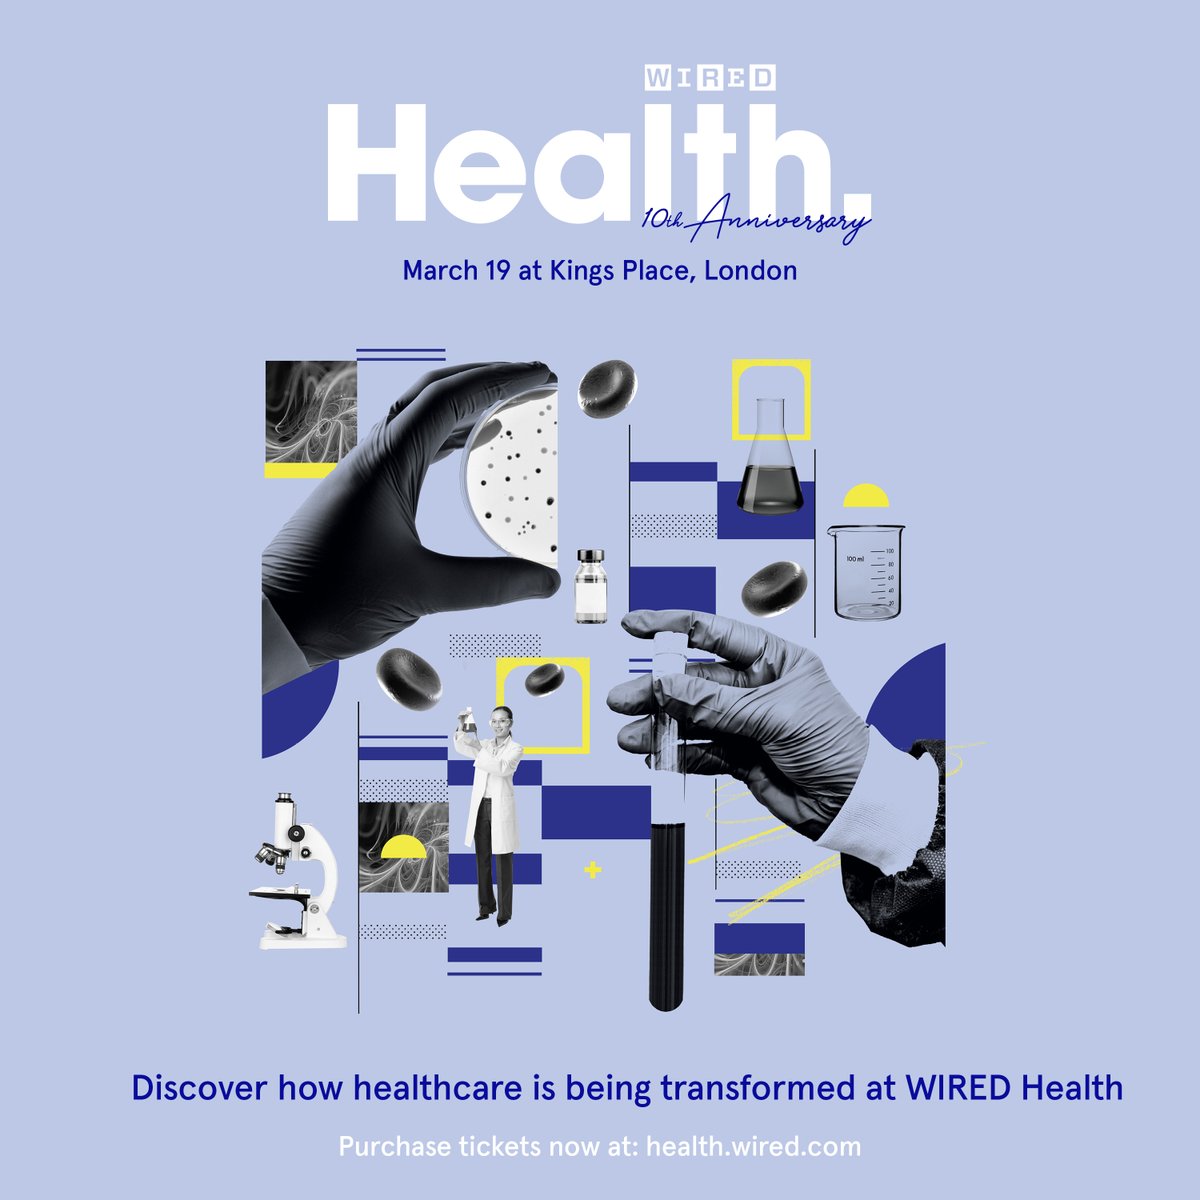 It's your last chance to get tickets to #WIREDHealth! Taking place tomorrow, WIRED Health highlights the most exciting and thought-provoking disruptors, scientists, and practitioners making a positive change in the way we provide and access healthcare. health.wired.com